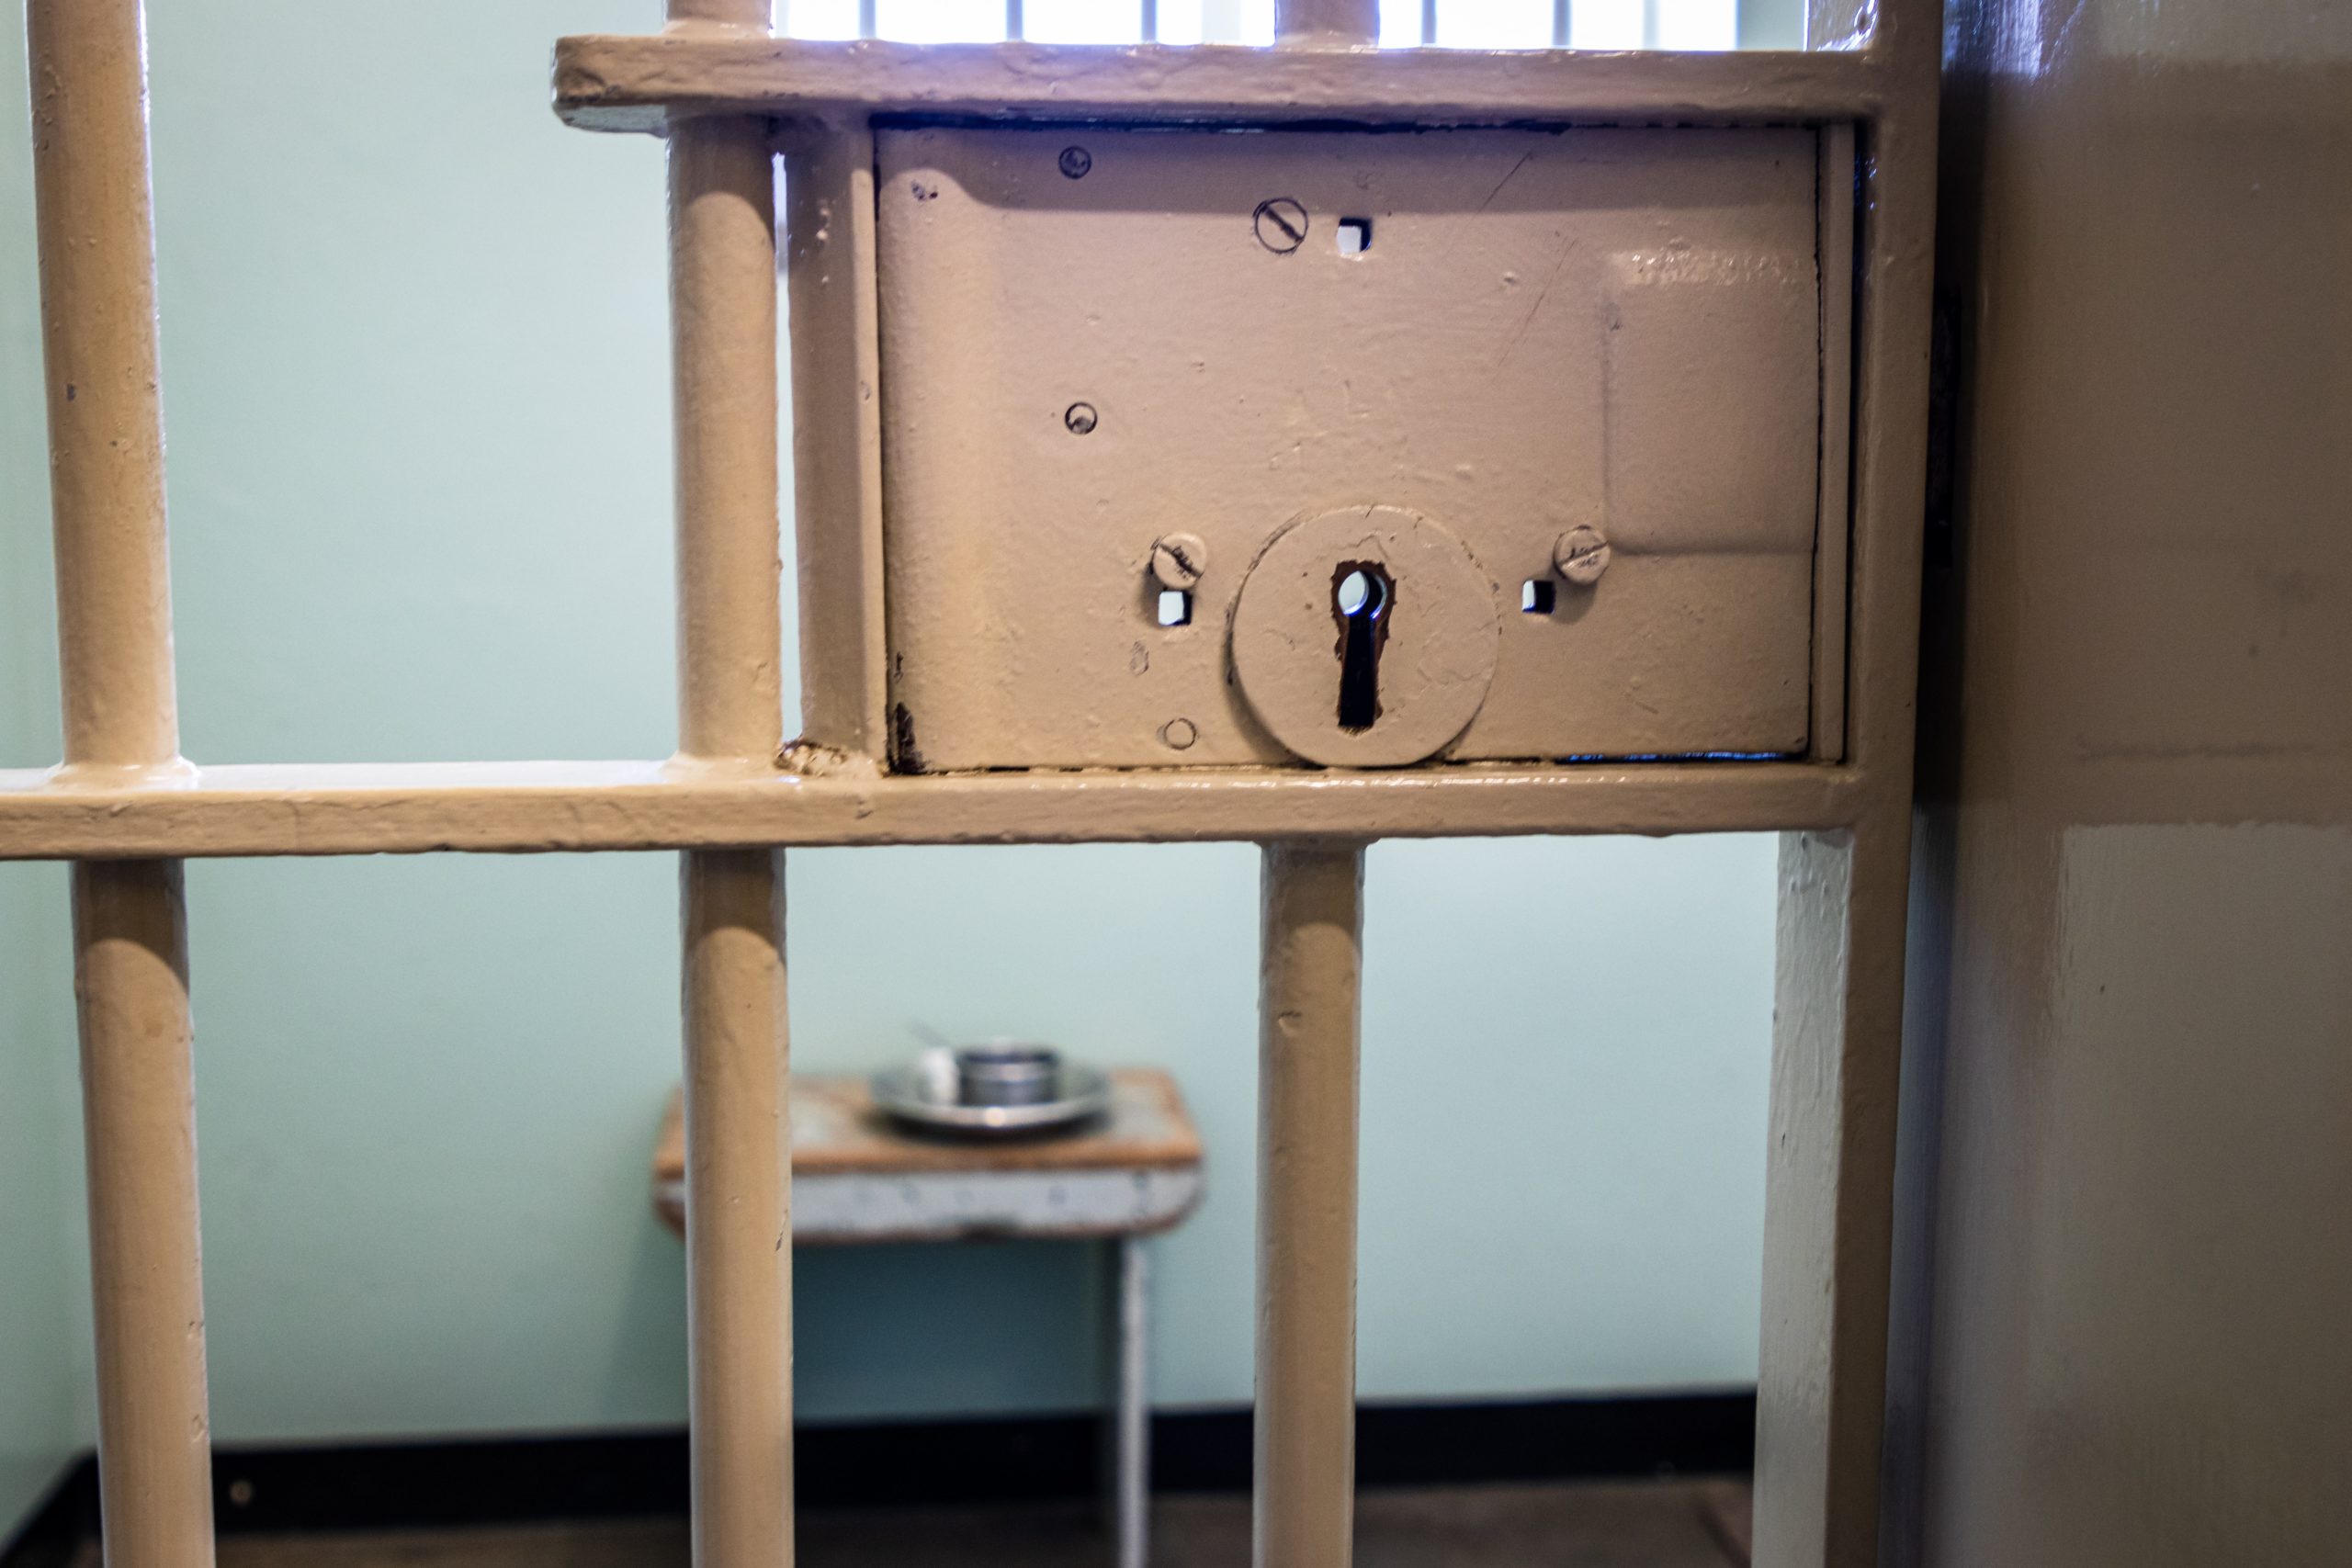 How Booking Fewer Inmates Could Slow Coronavirus in Jails